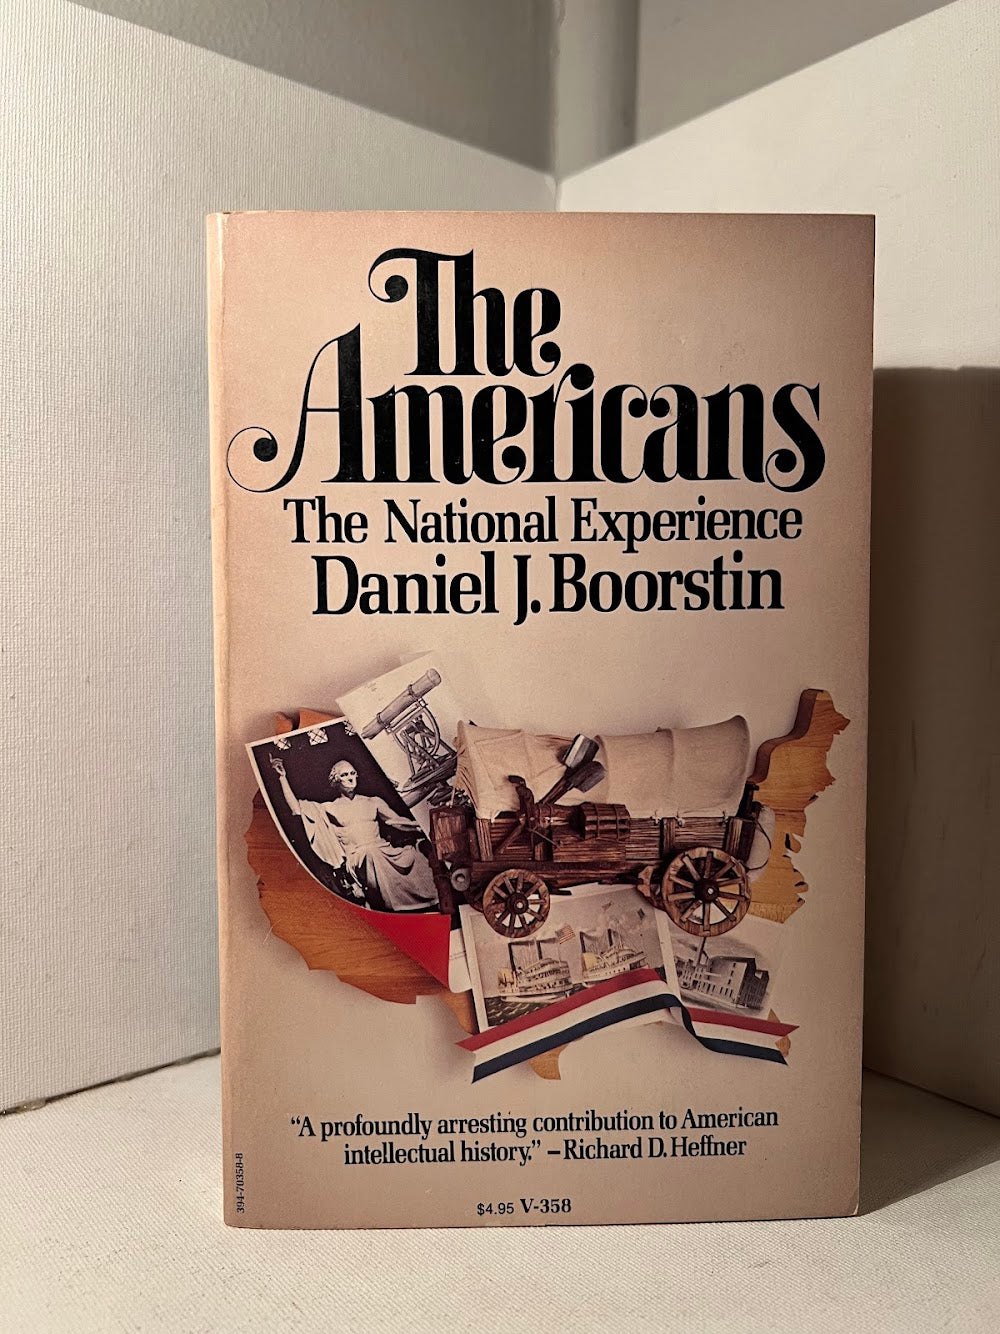 The Americans (trilogy) by Daniel Boorstin